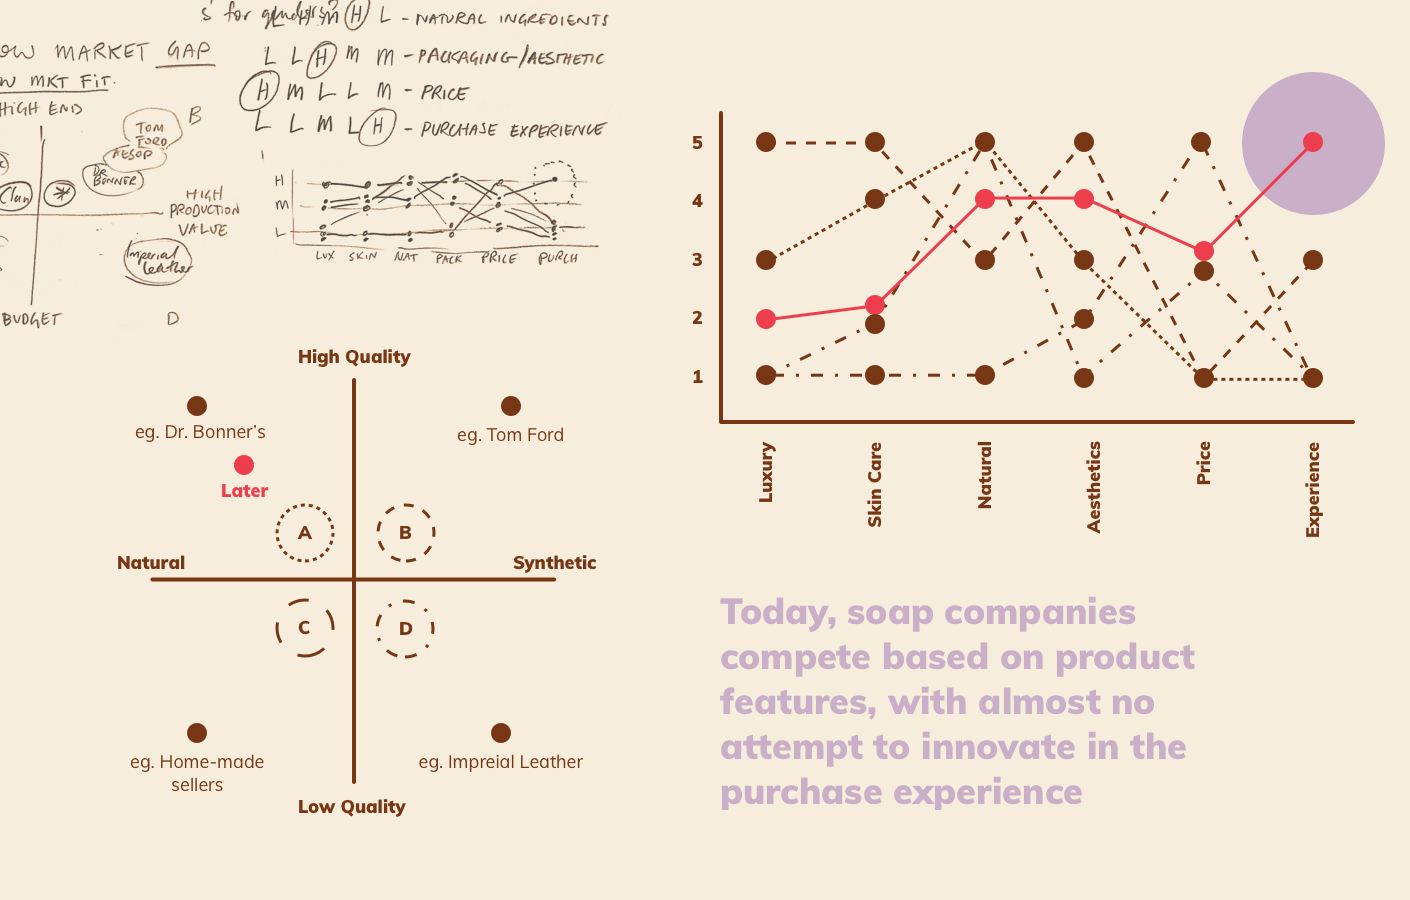 Today, soap companies comptete based on product features, with almost no attempt to innovate in the purchase experience